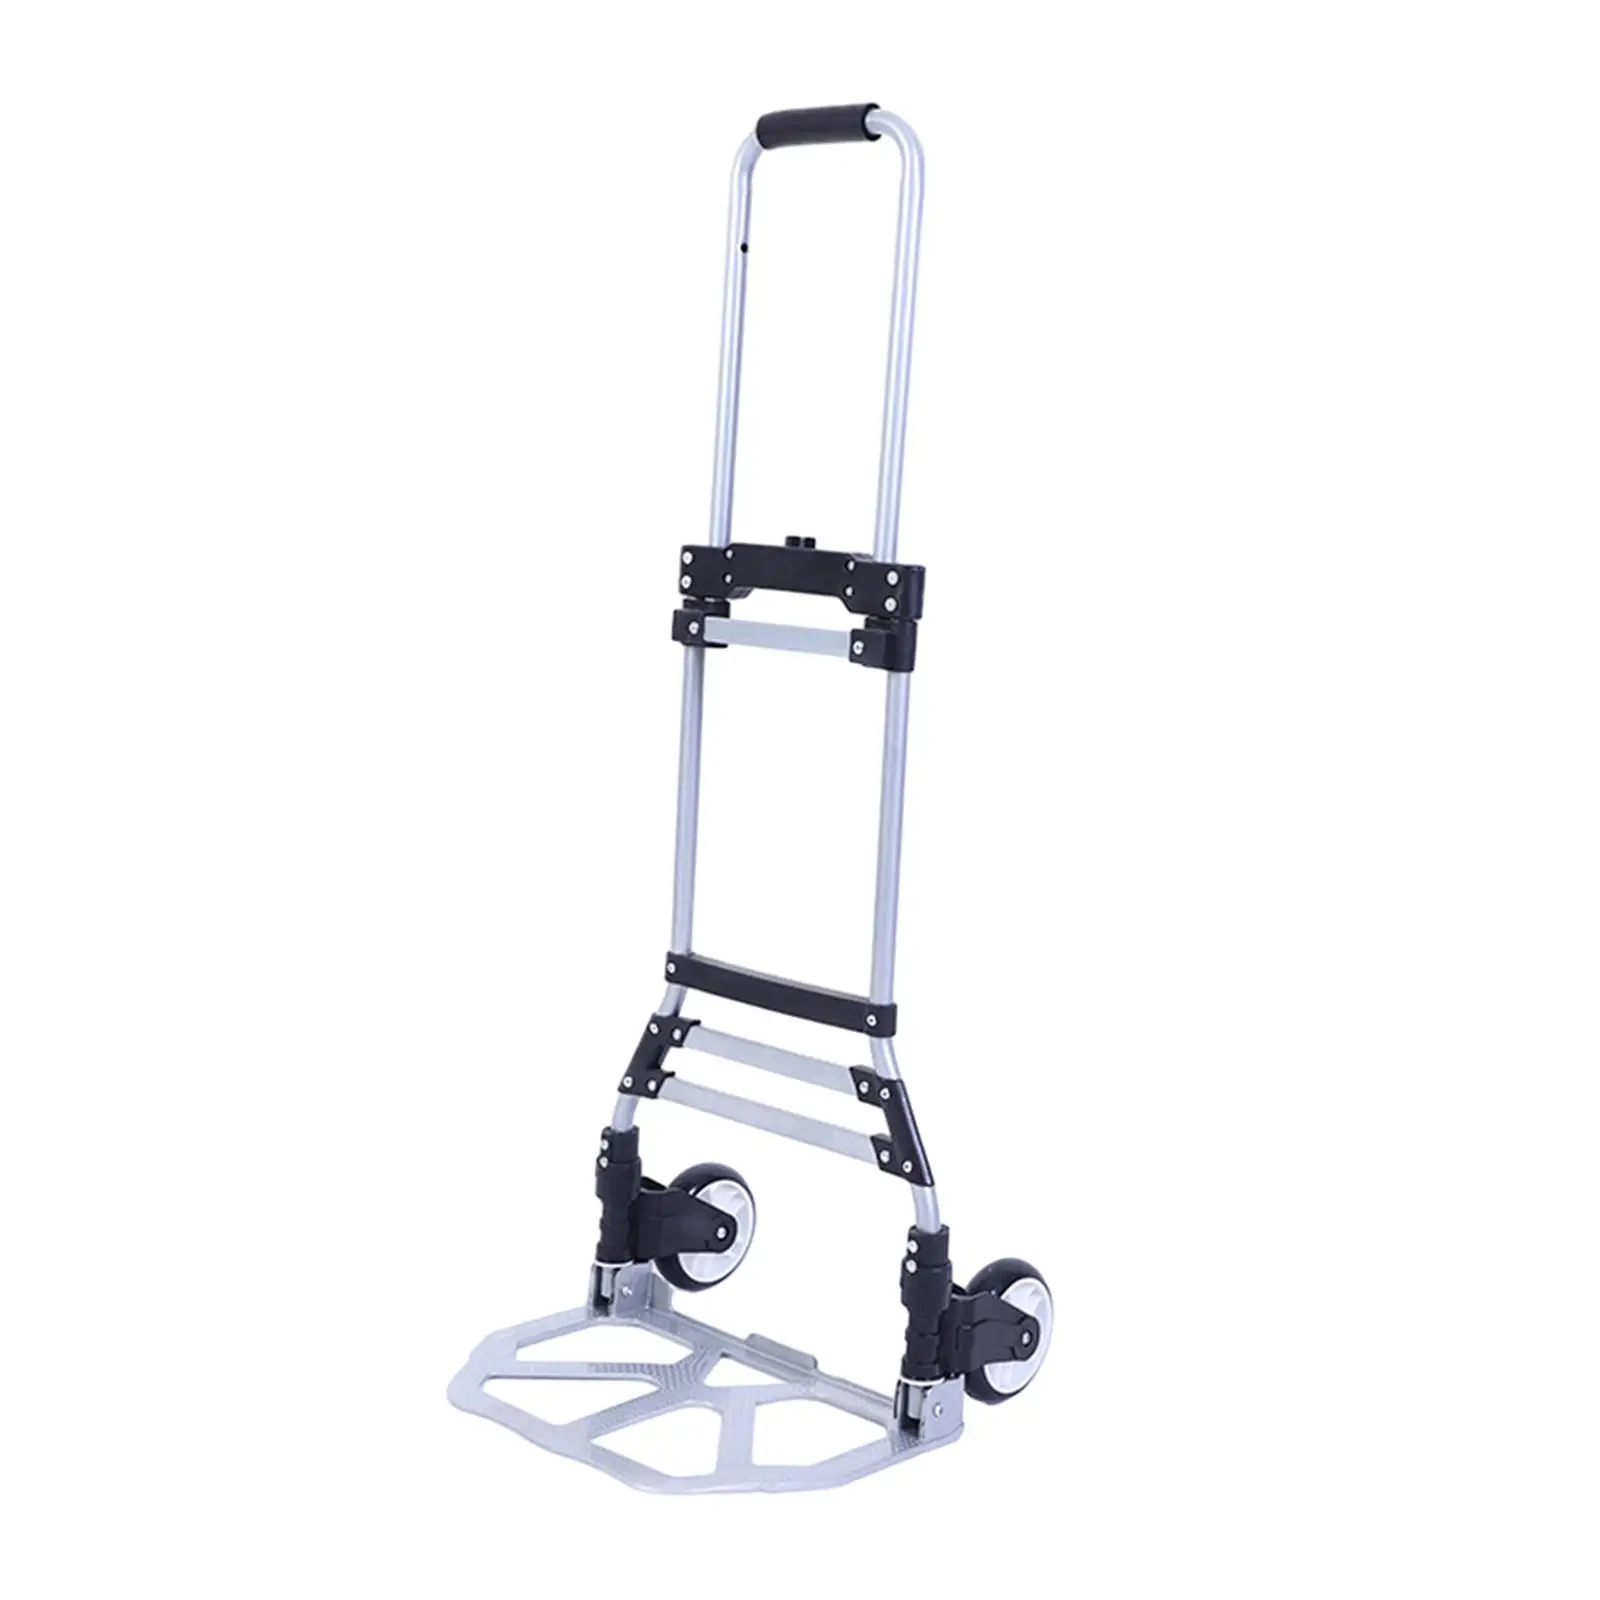 Folding Luggage Trolley, Foldable Hand Cart, Adjustable Luggage Cart for Moving Transportation Camping